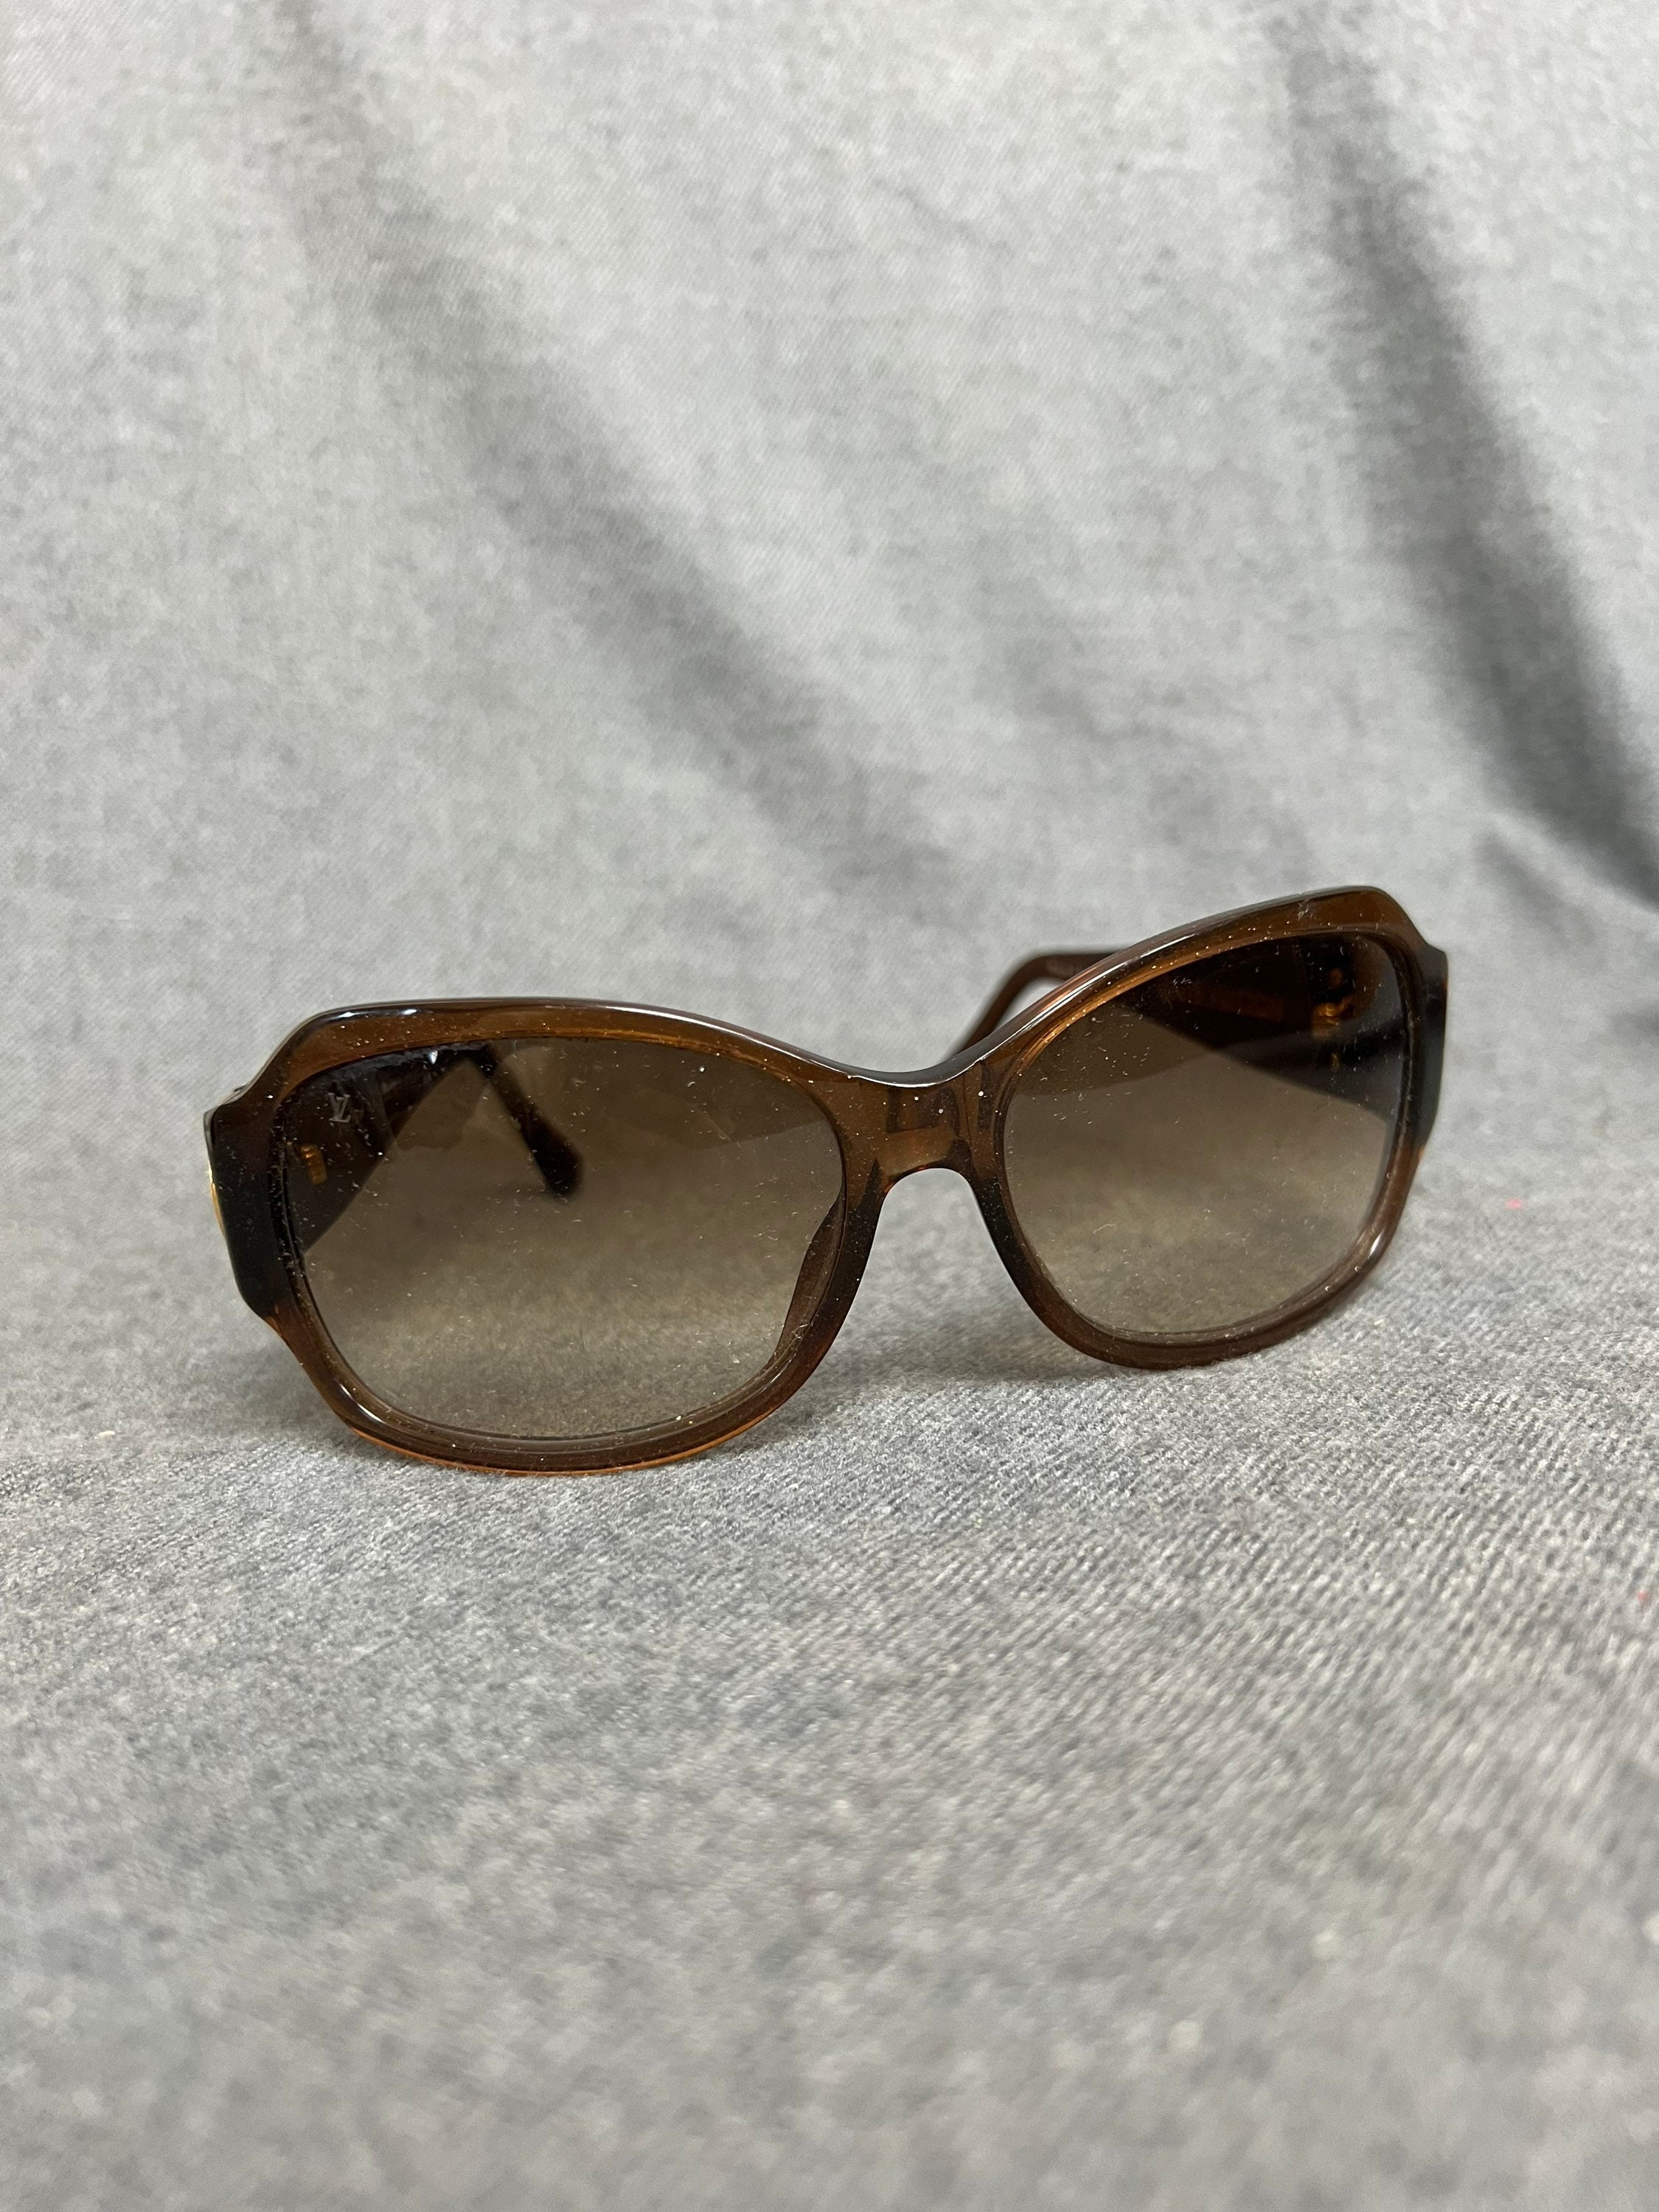 Buy Pre-Owned Authentic Luxury Louis Vuitton Sunglasses Online